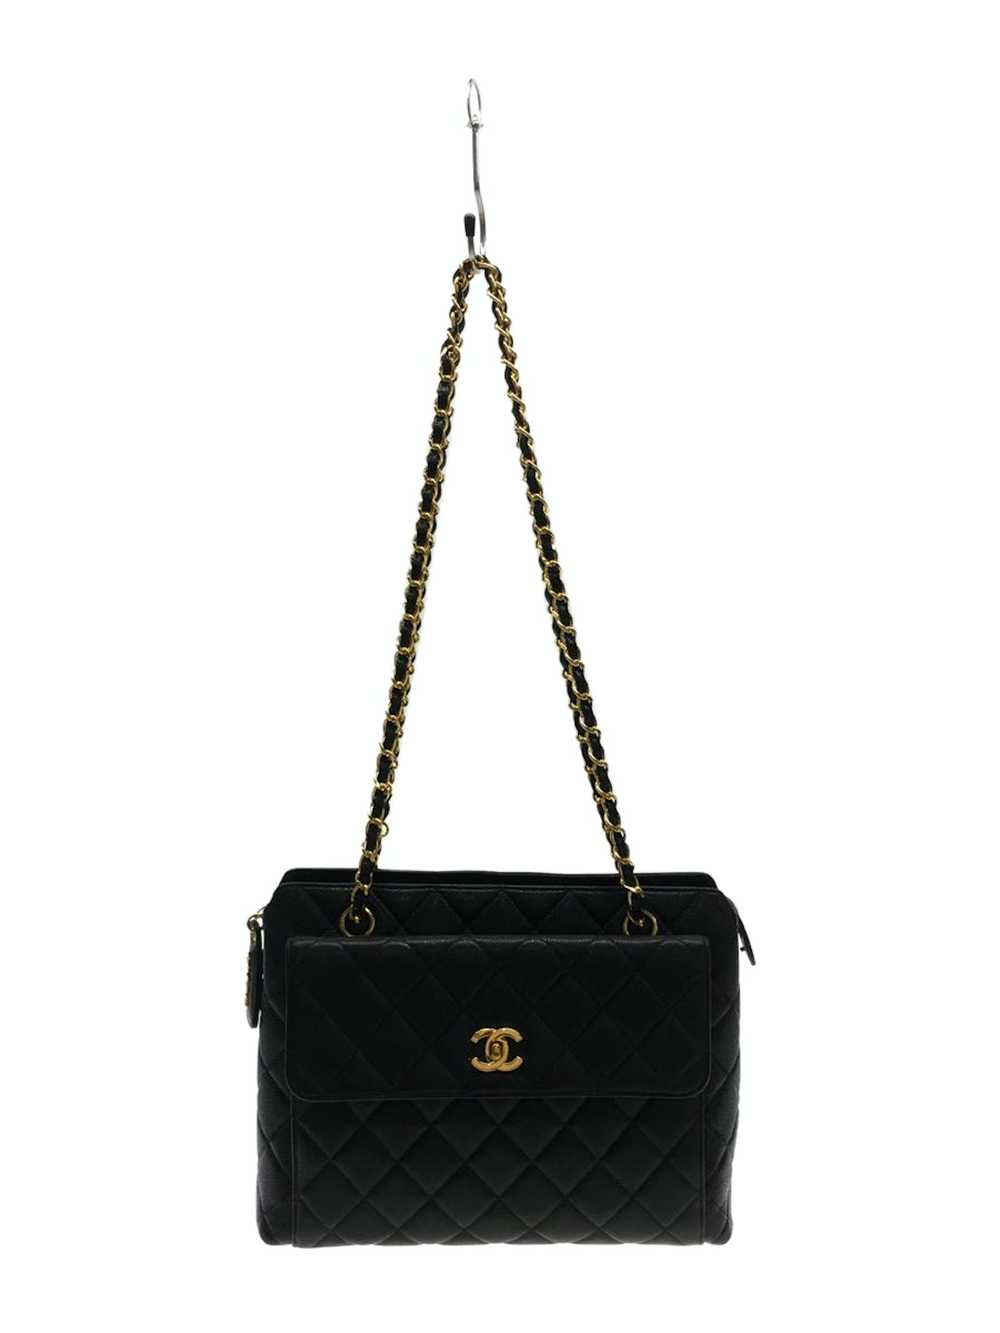 Chanel Chanel Leather Matelasse Tote Bag - image 1